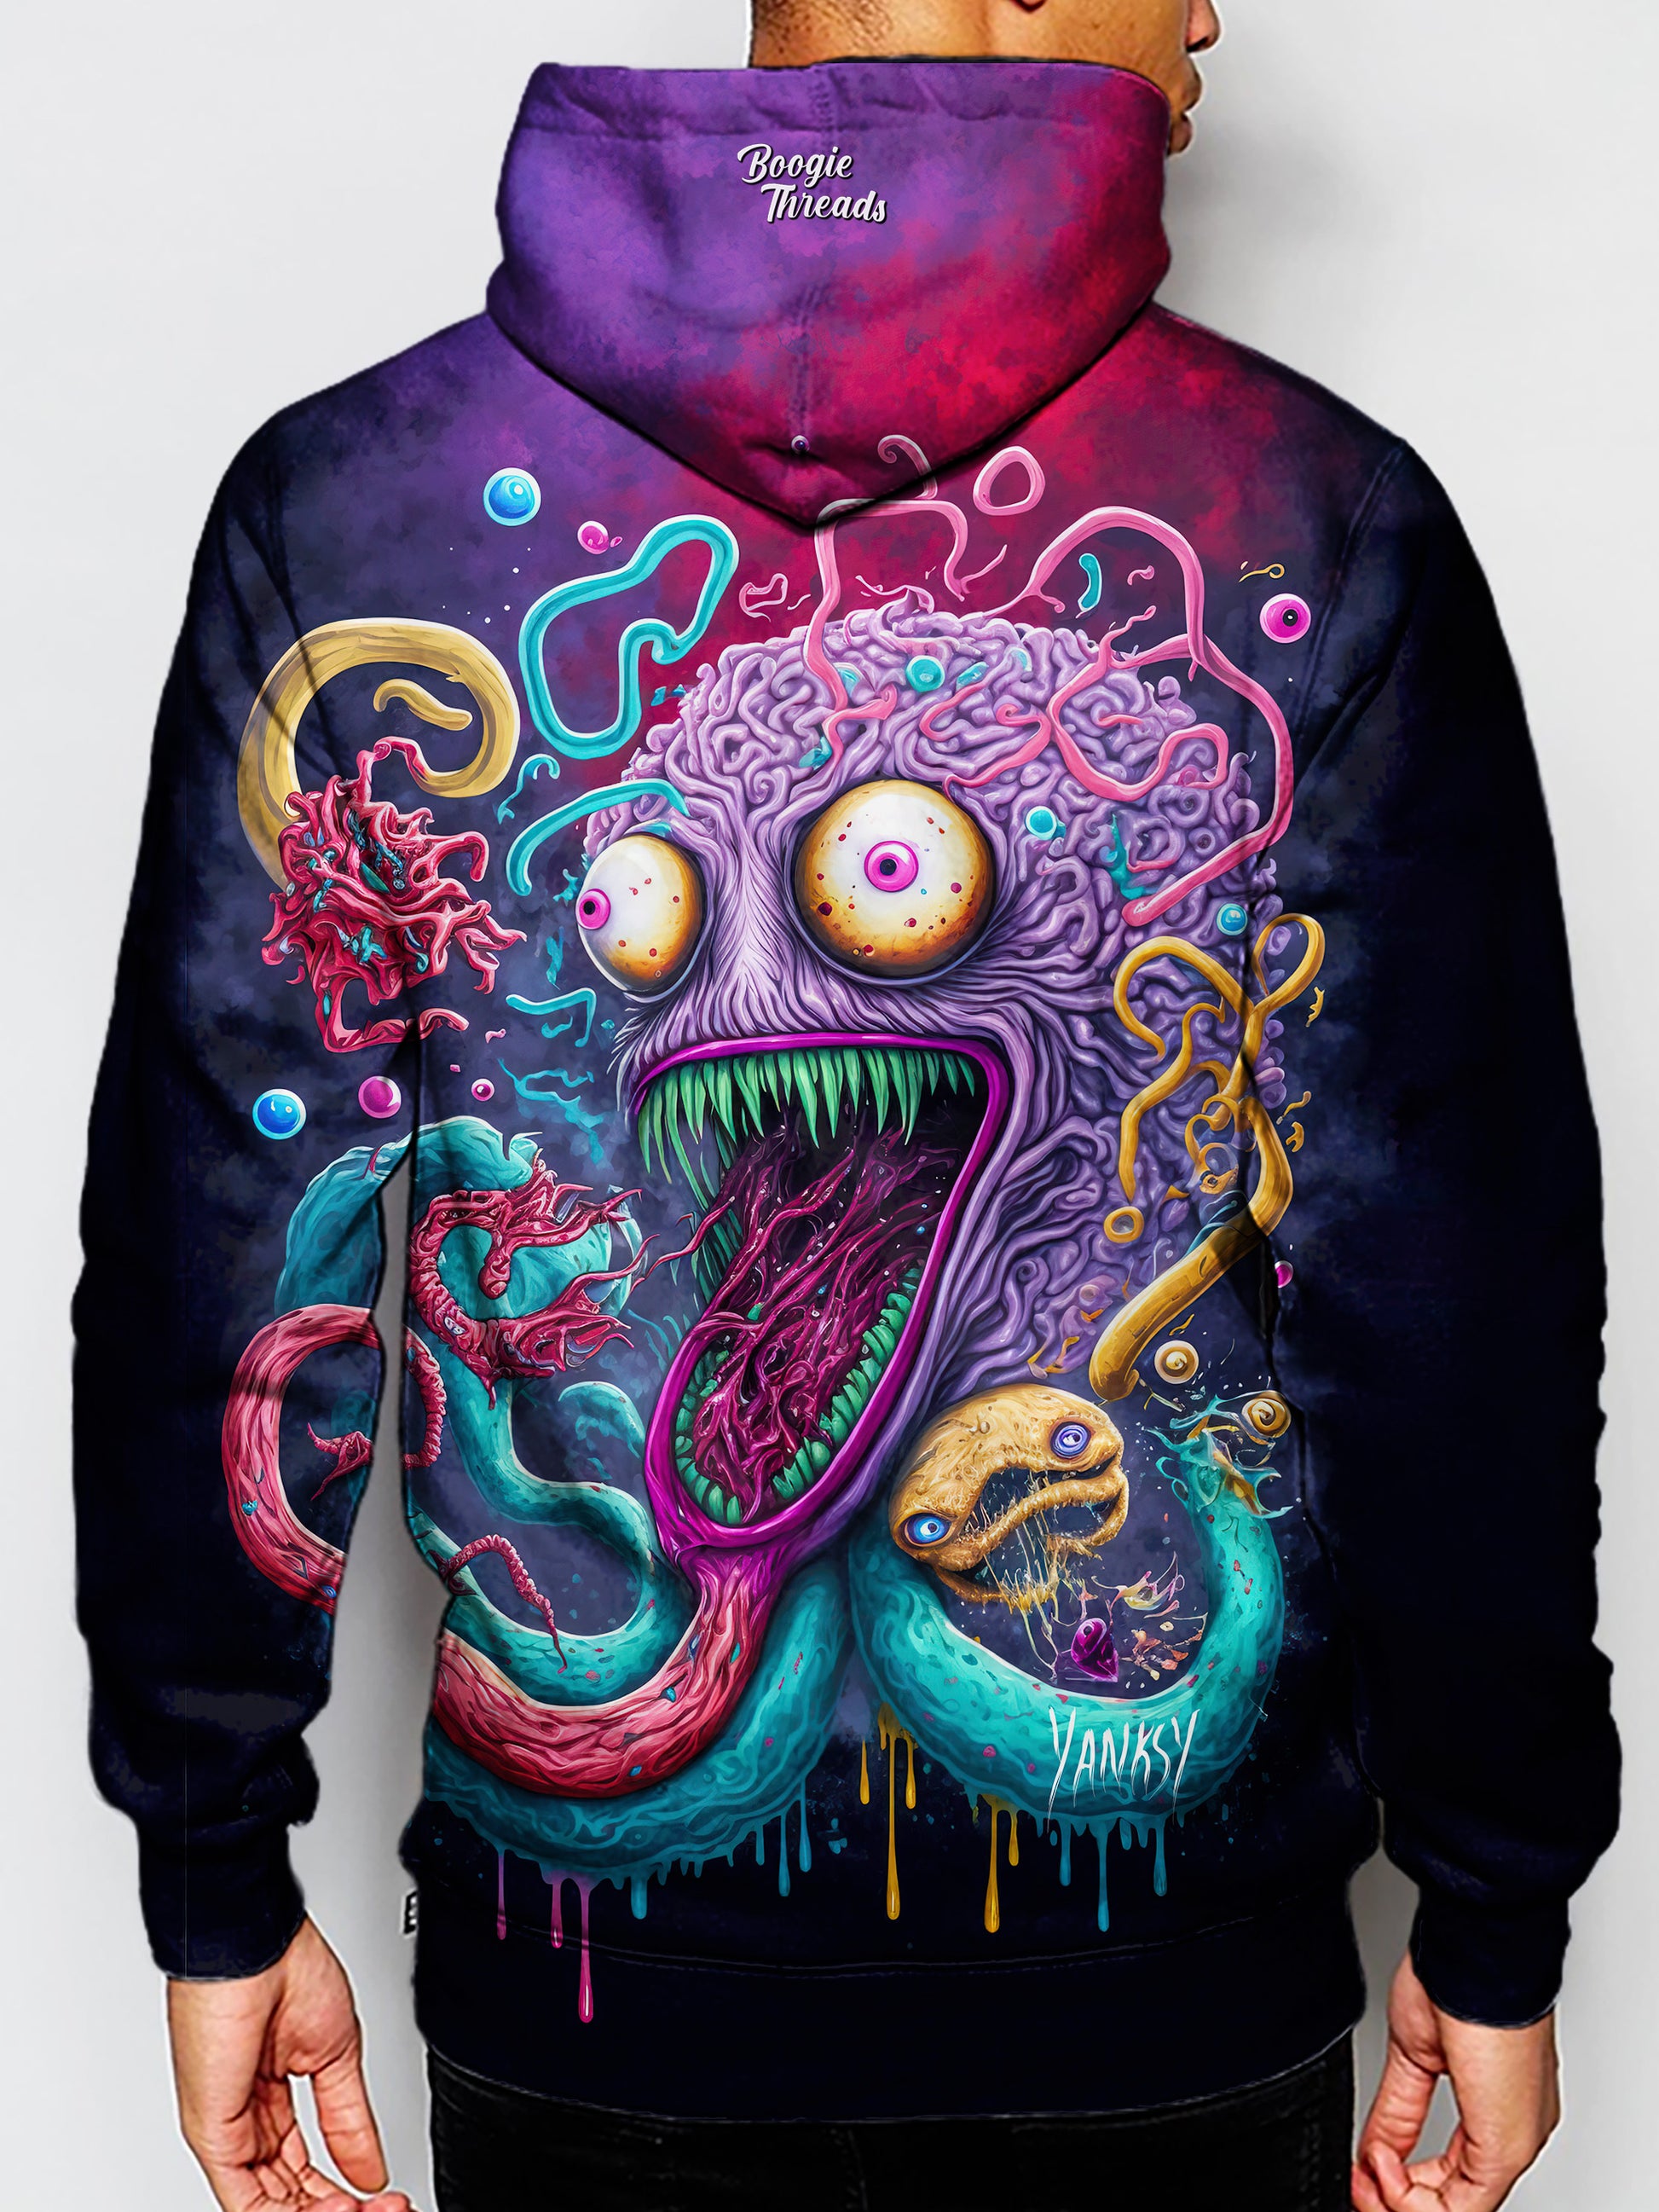 Turn heads wherever you go with this mesmerizing and trippy hoodie